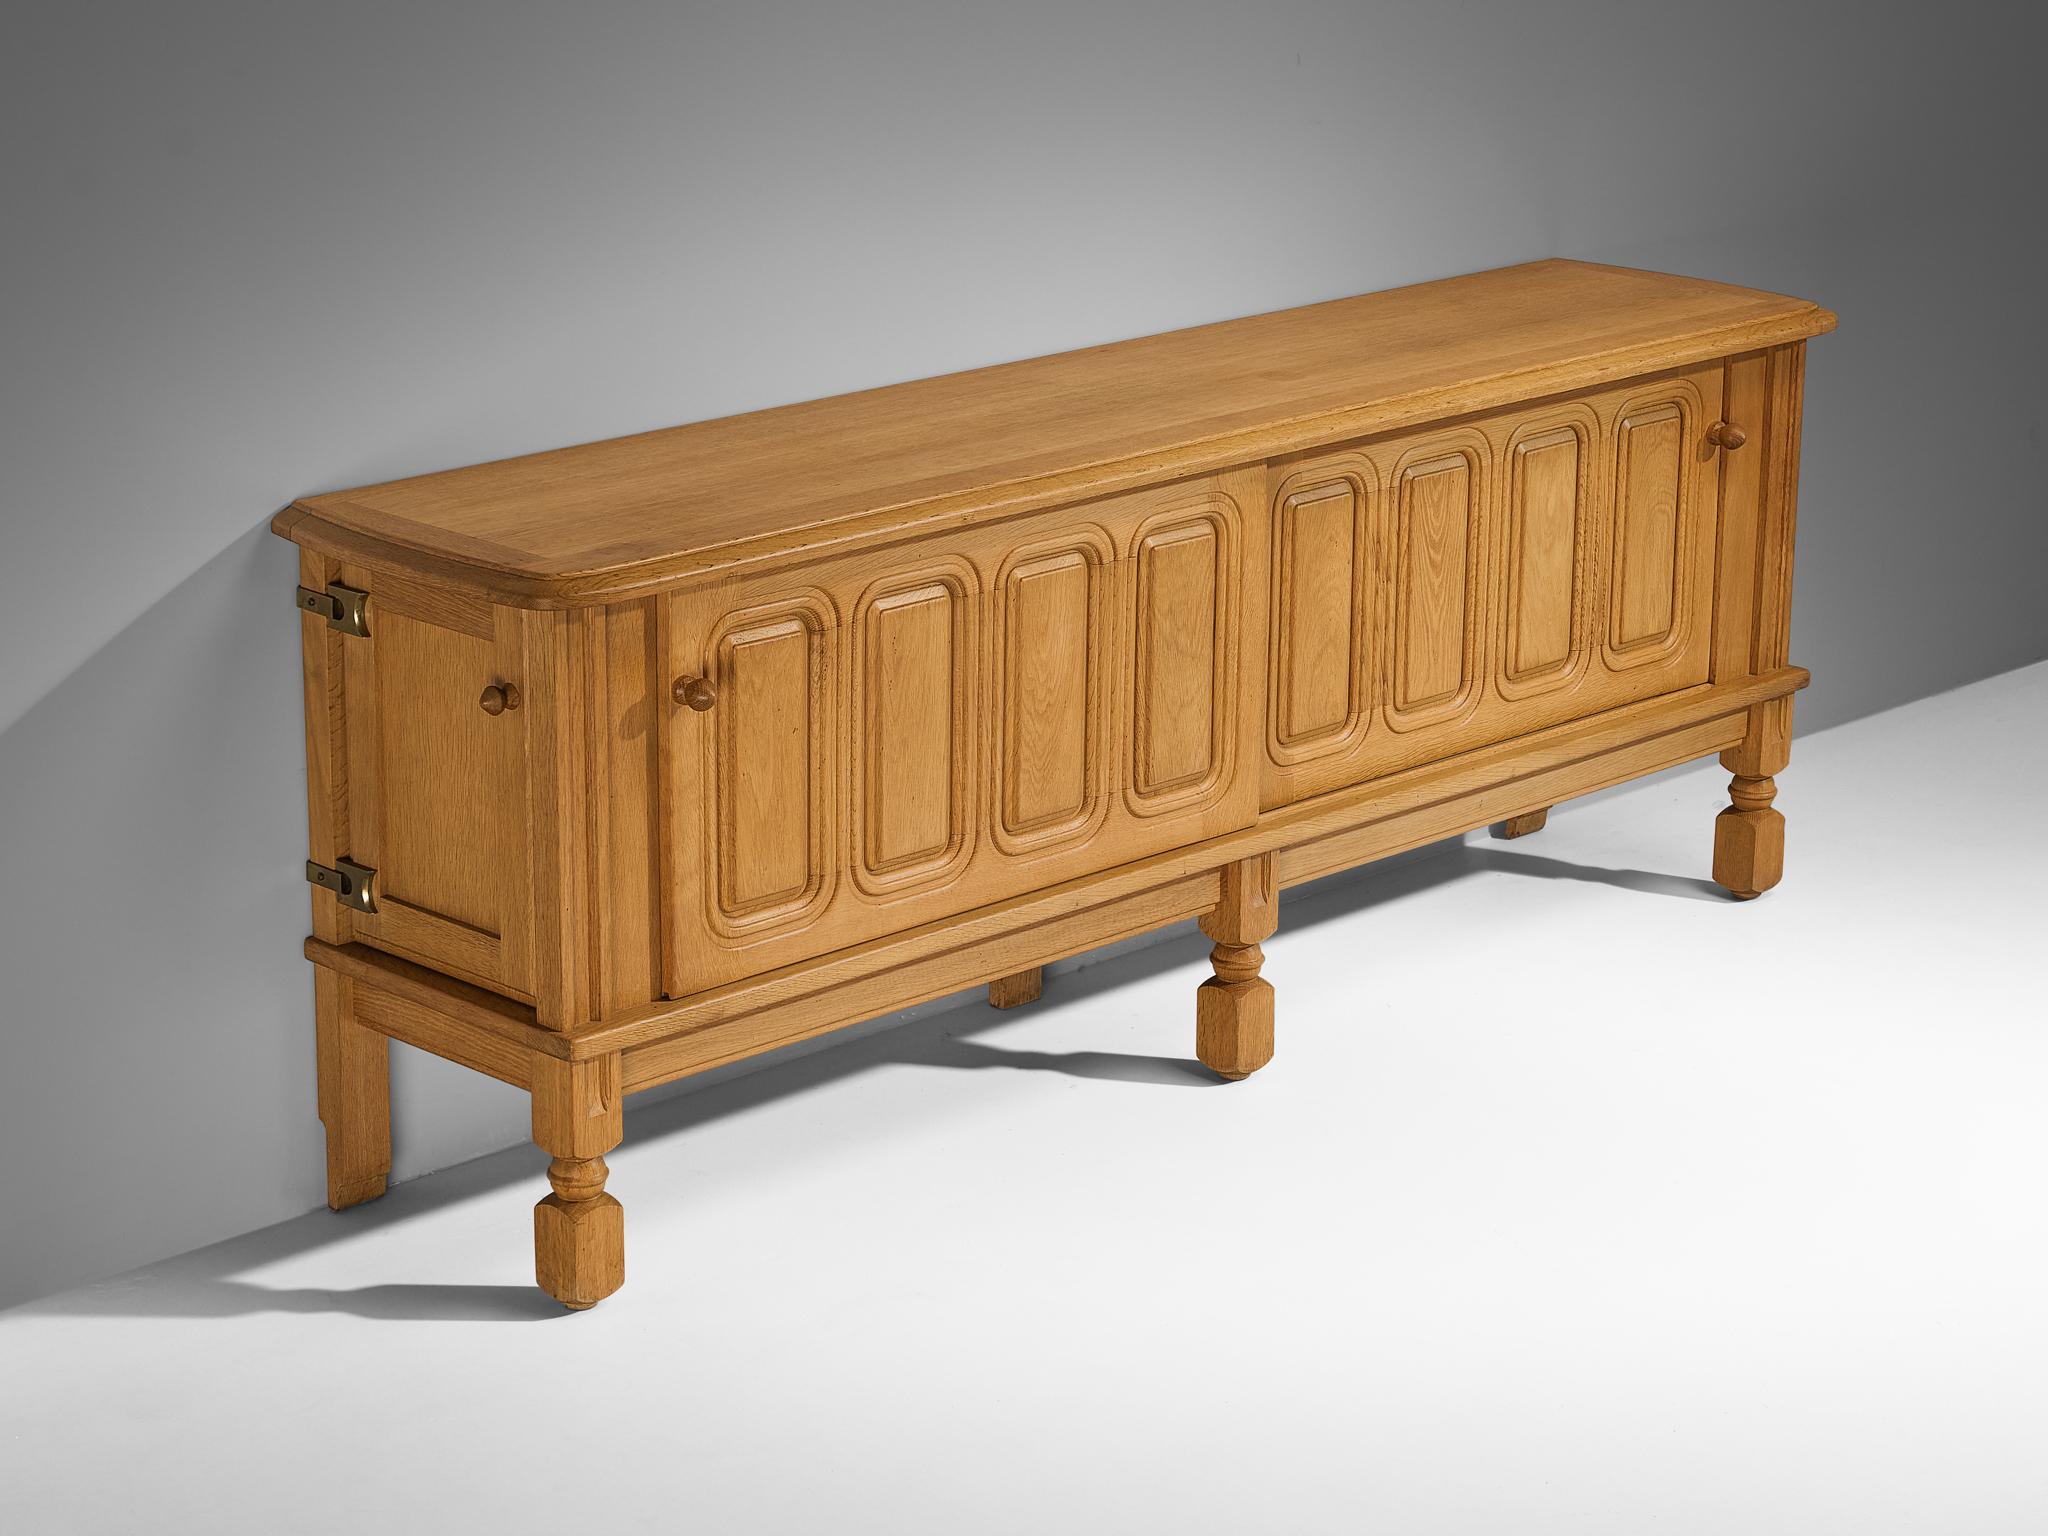 Guillerme et Chambron for Votre Maison, sideboard, oak, France, 1960s.

This charming sideboard is made by the designer duo Guillerme & Chambron. This particular design is characterized by a solid construction that is noticeable in the engraved